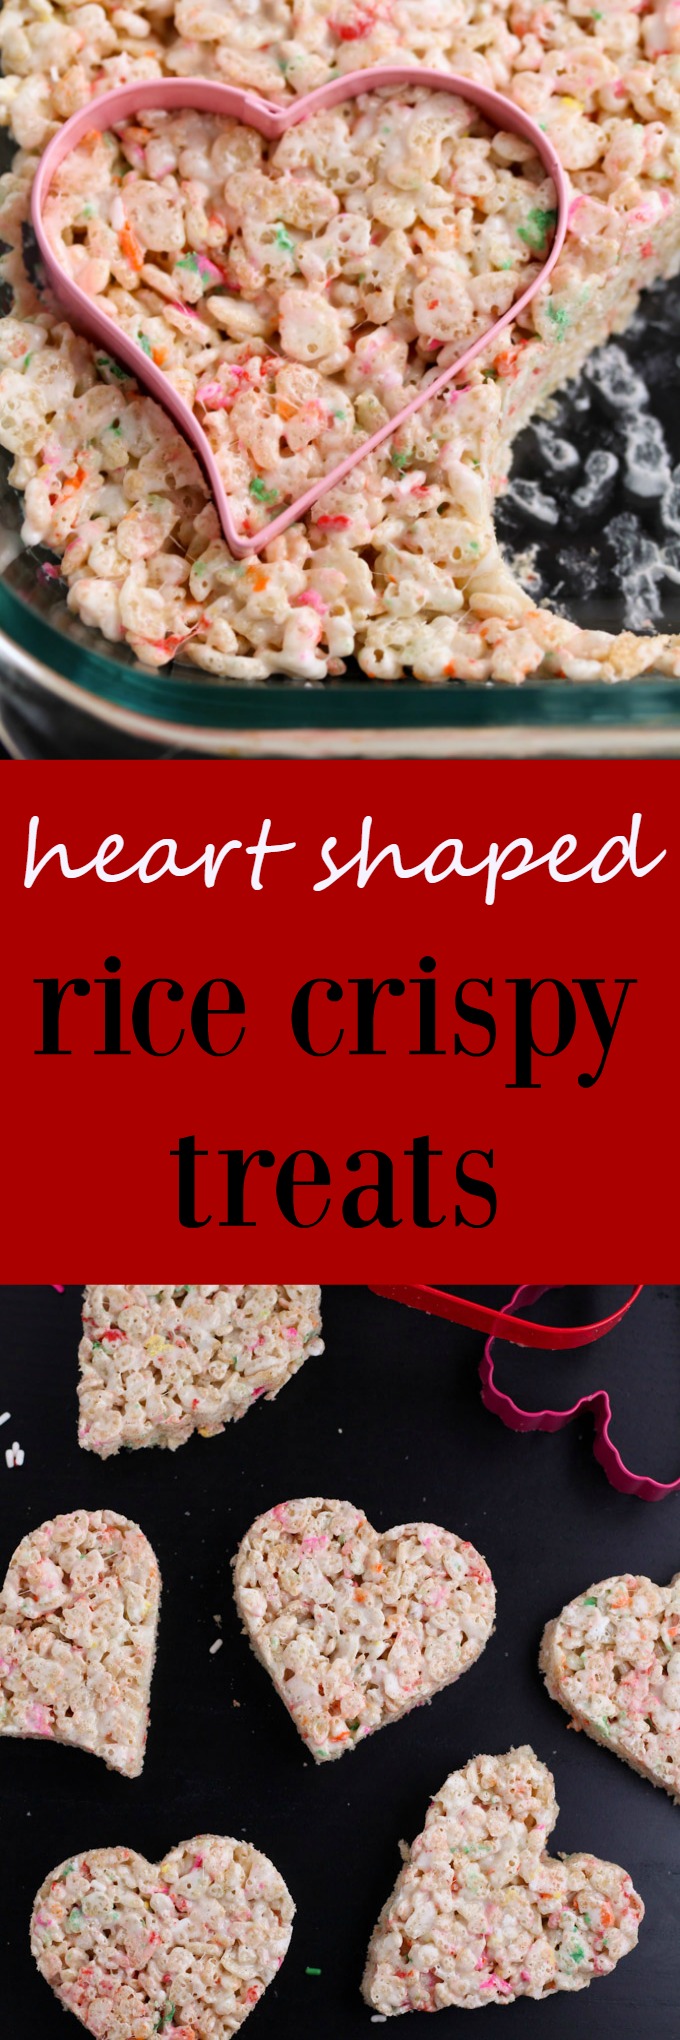 Simple and delicious rice crispy treats cut into heart shapes are sure to please the people you care about. www.cookingismessy.com